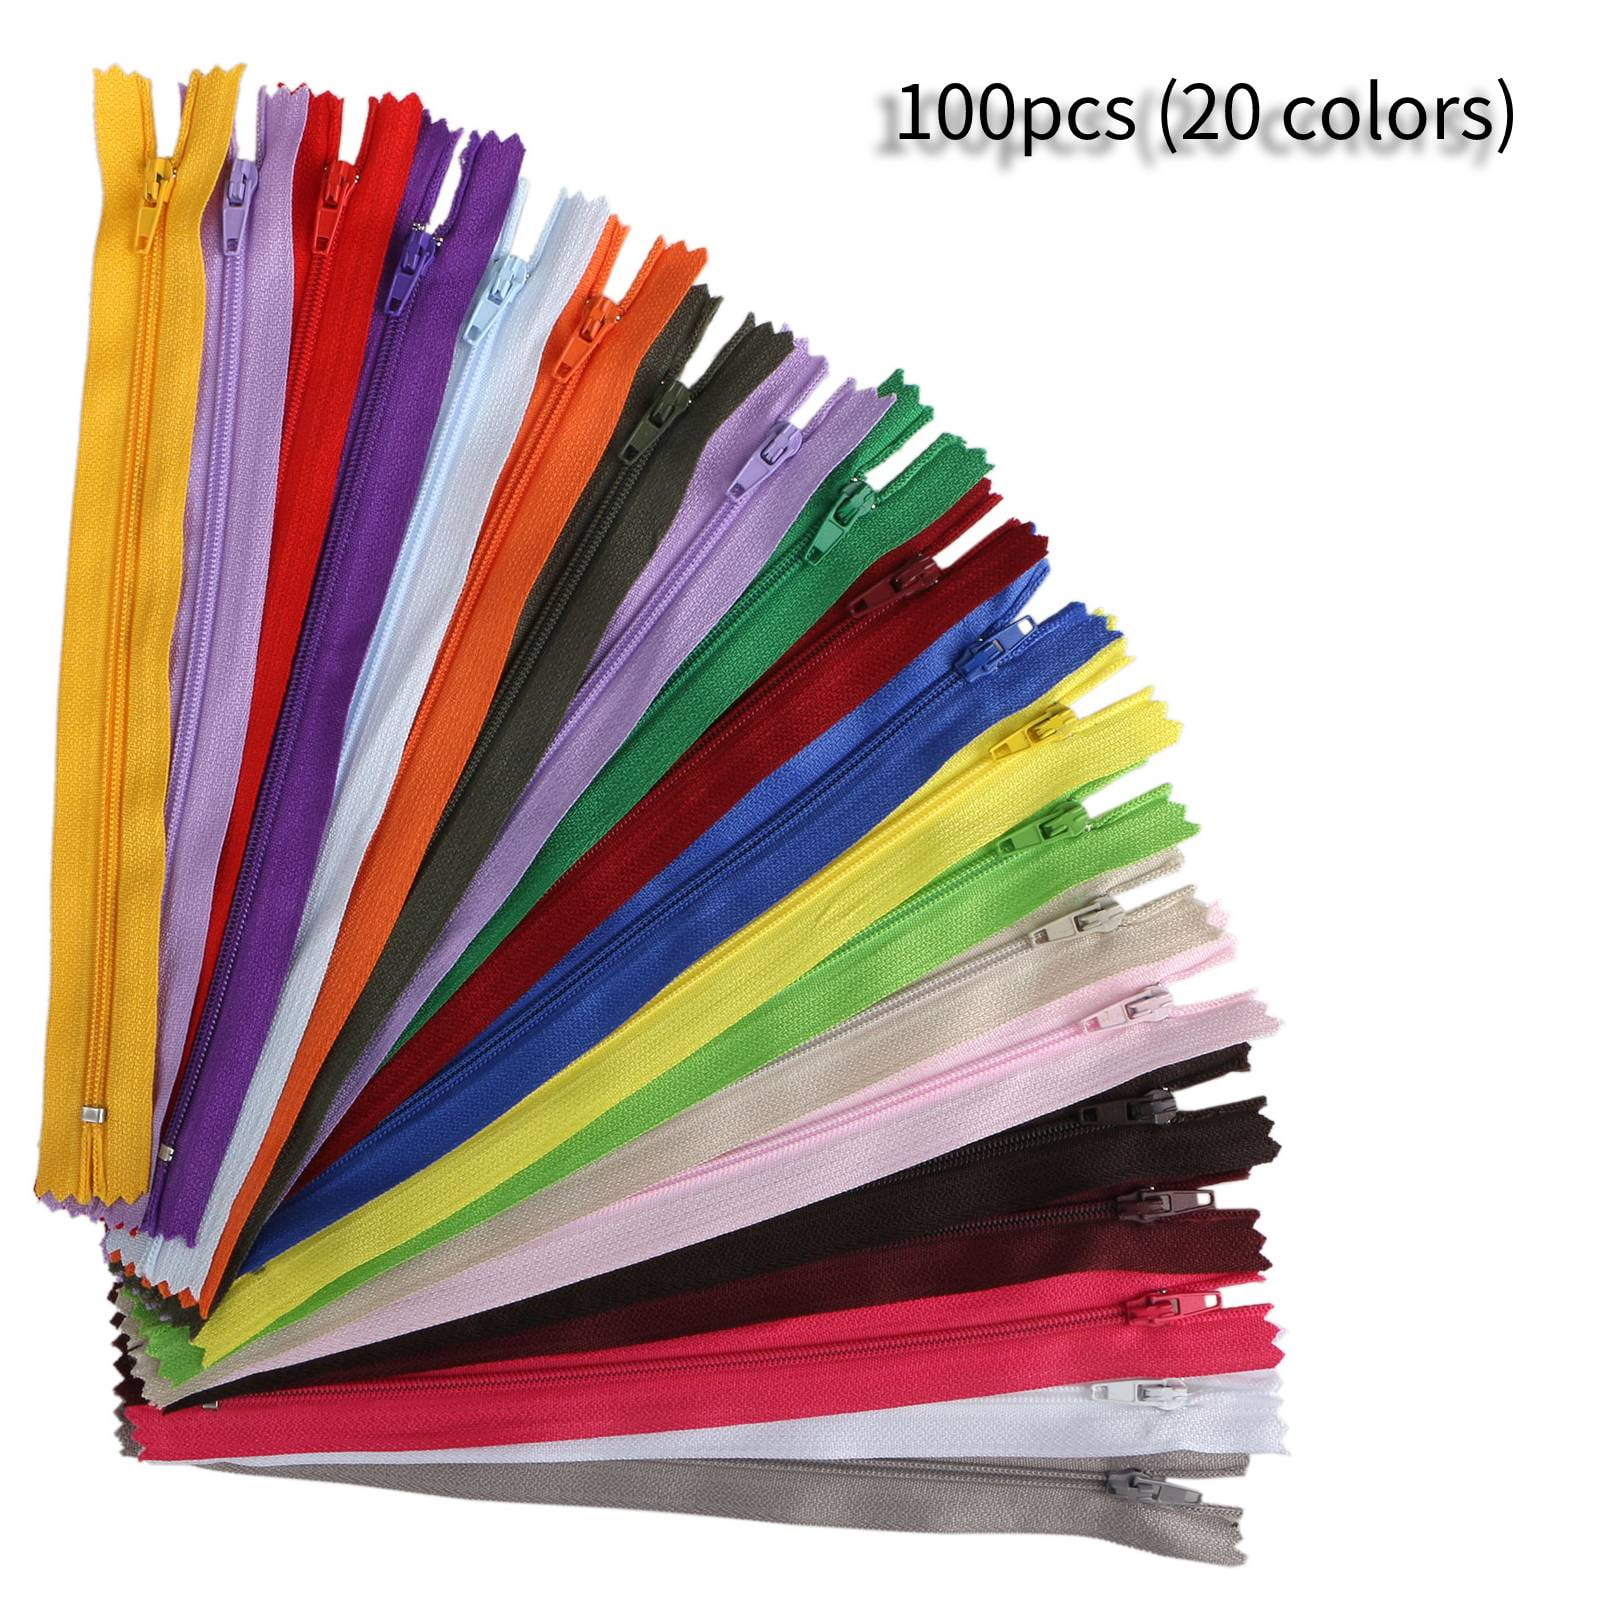 Sewing Zippers 9 Inch-Nylon Zippers Bulk 120PCS VOC DIY Zippers for Sewing Beautiful Tape Measure） Supplies Closed End Zippers for Tailor Sewing Crafts-20 Assorted Colors（Gift 